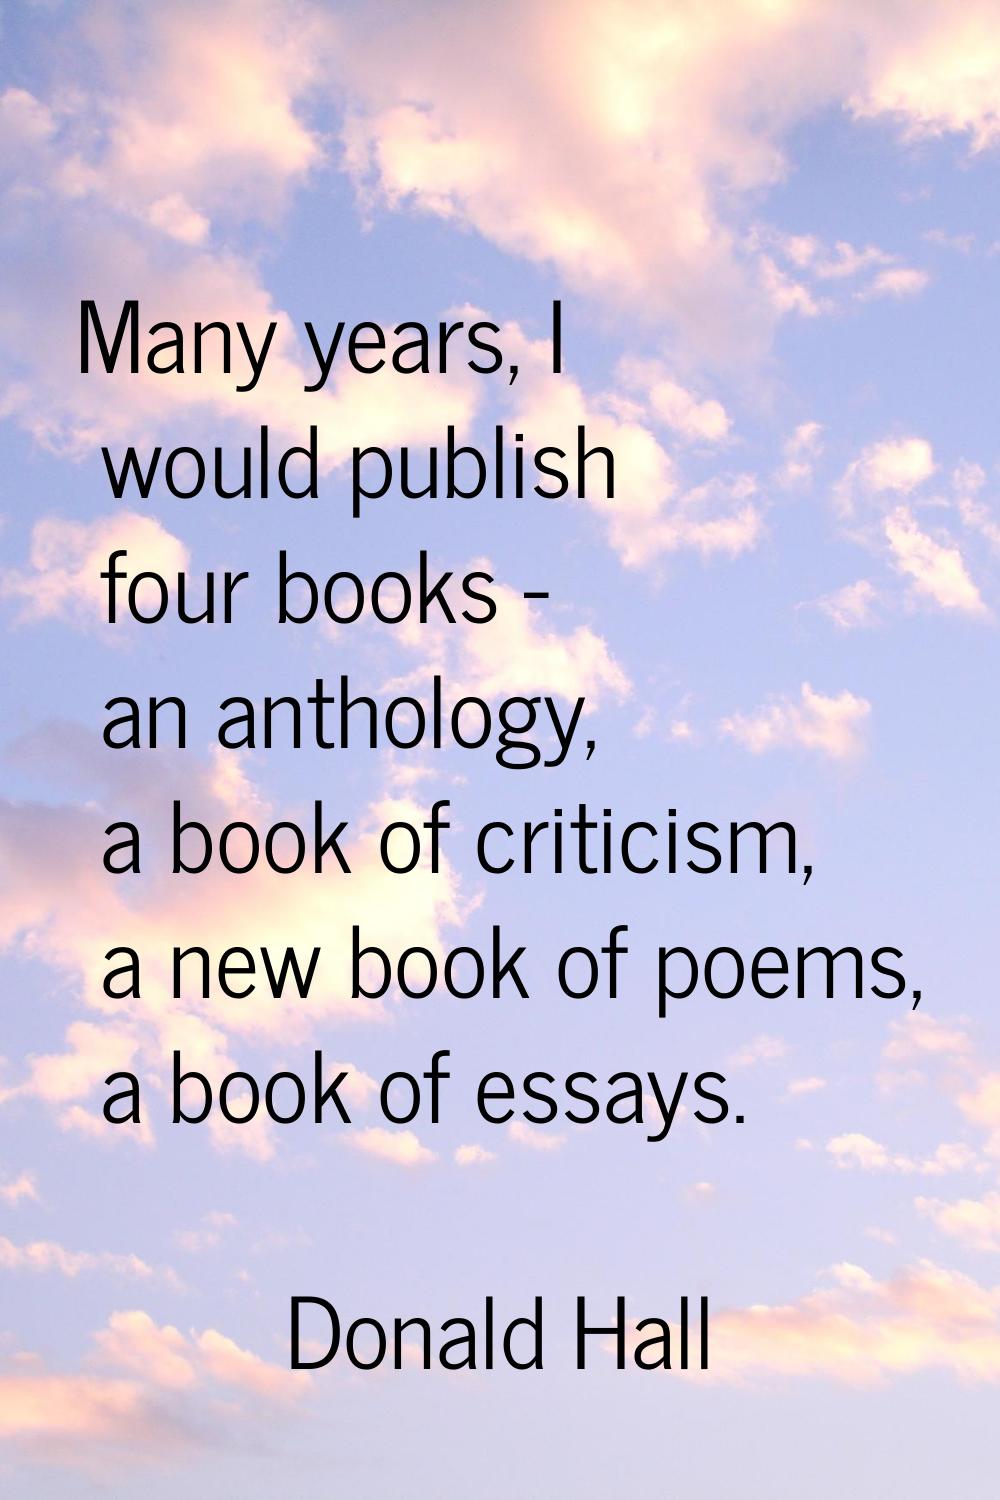 Many years, I would publish four books - an anthology, a book of criticism, a new book of poems, a 